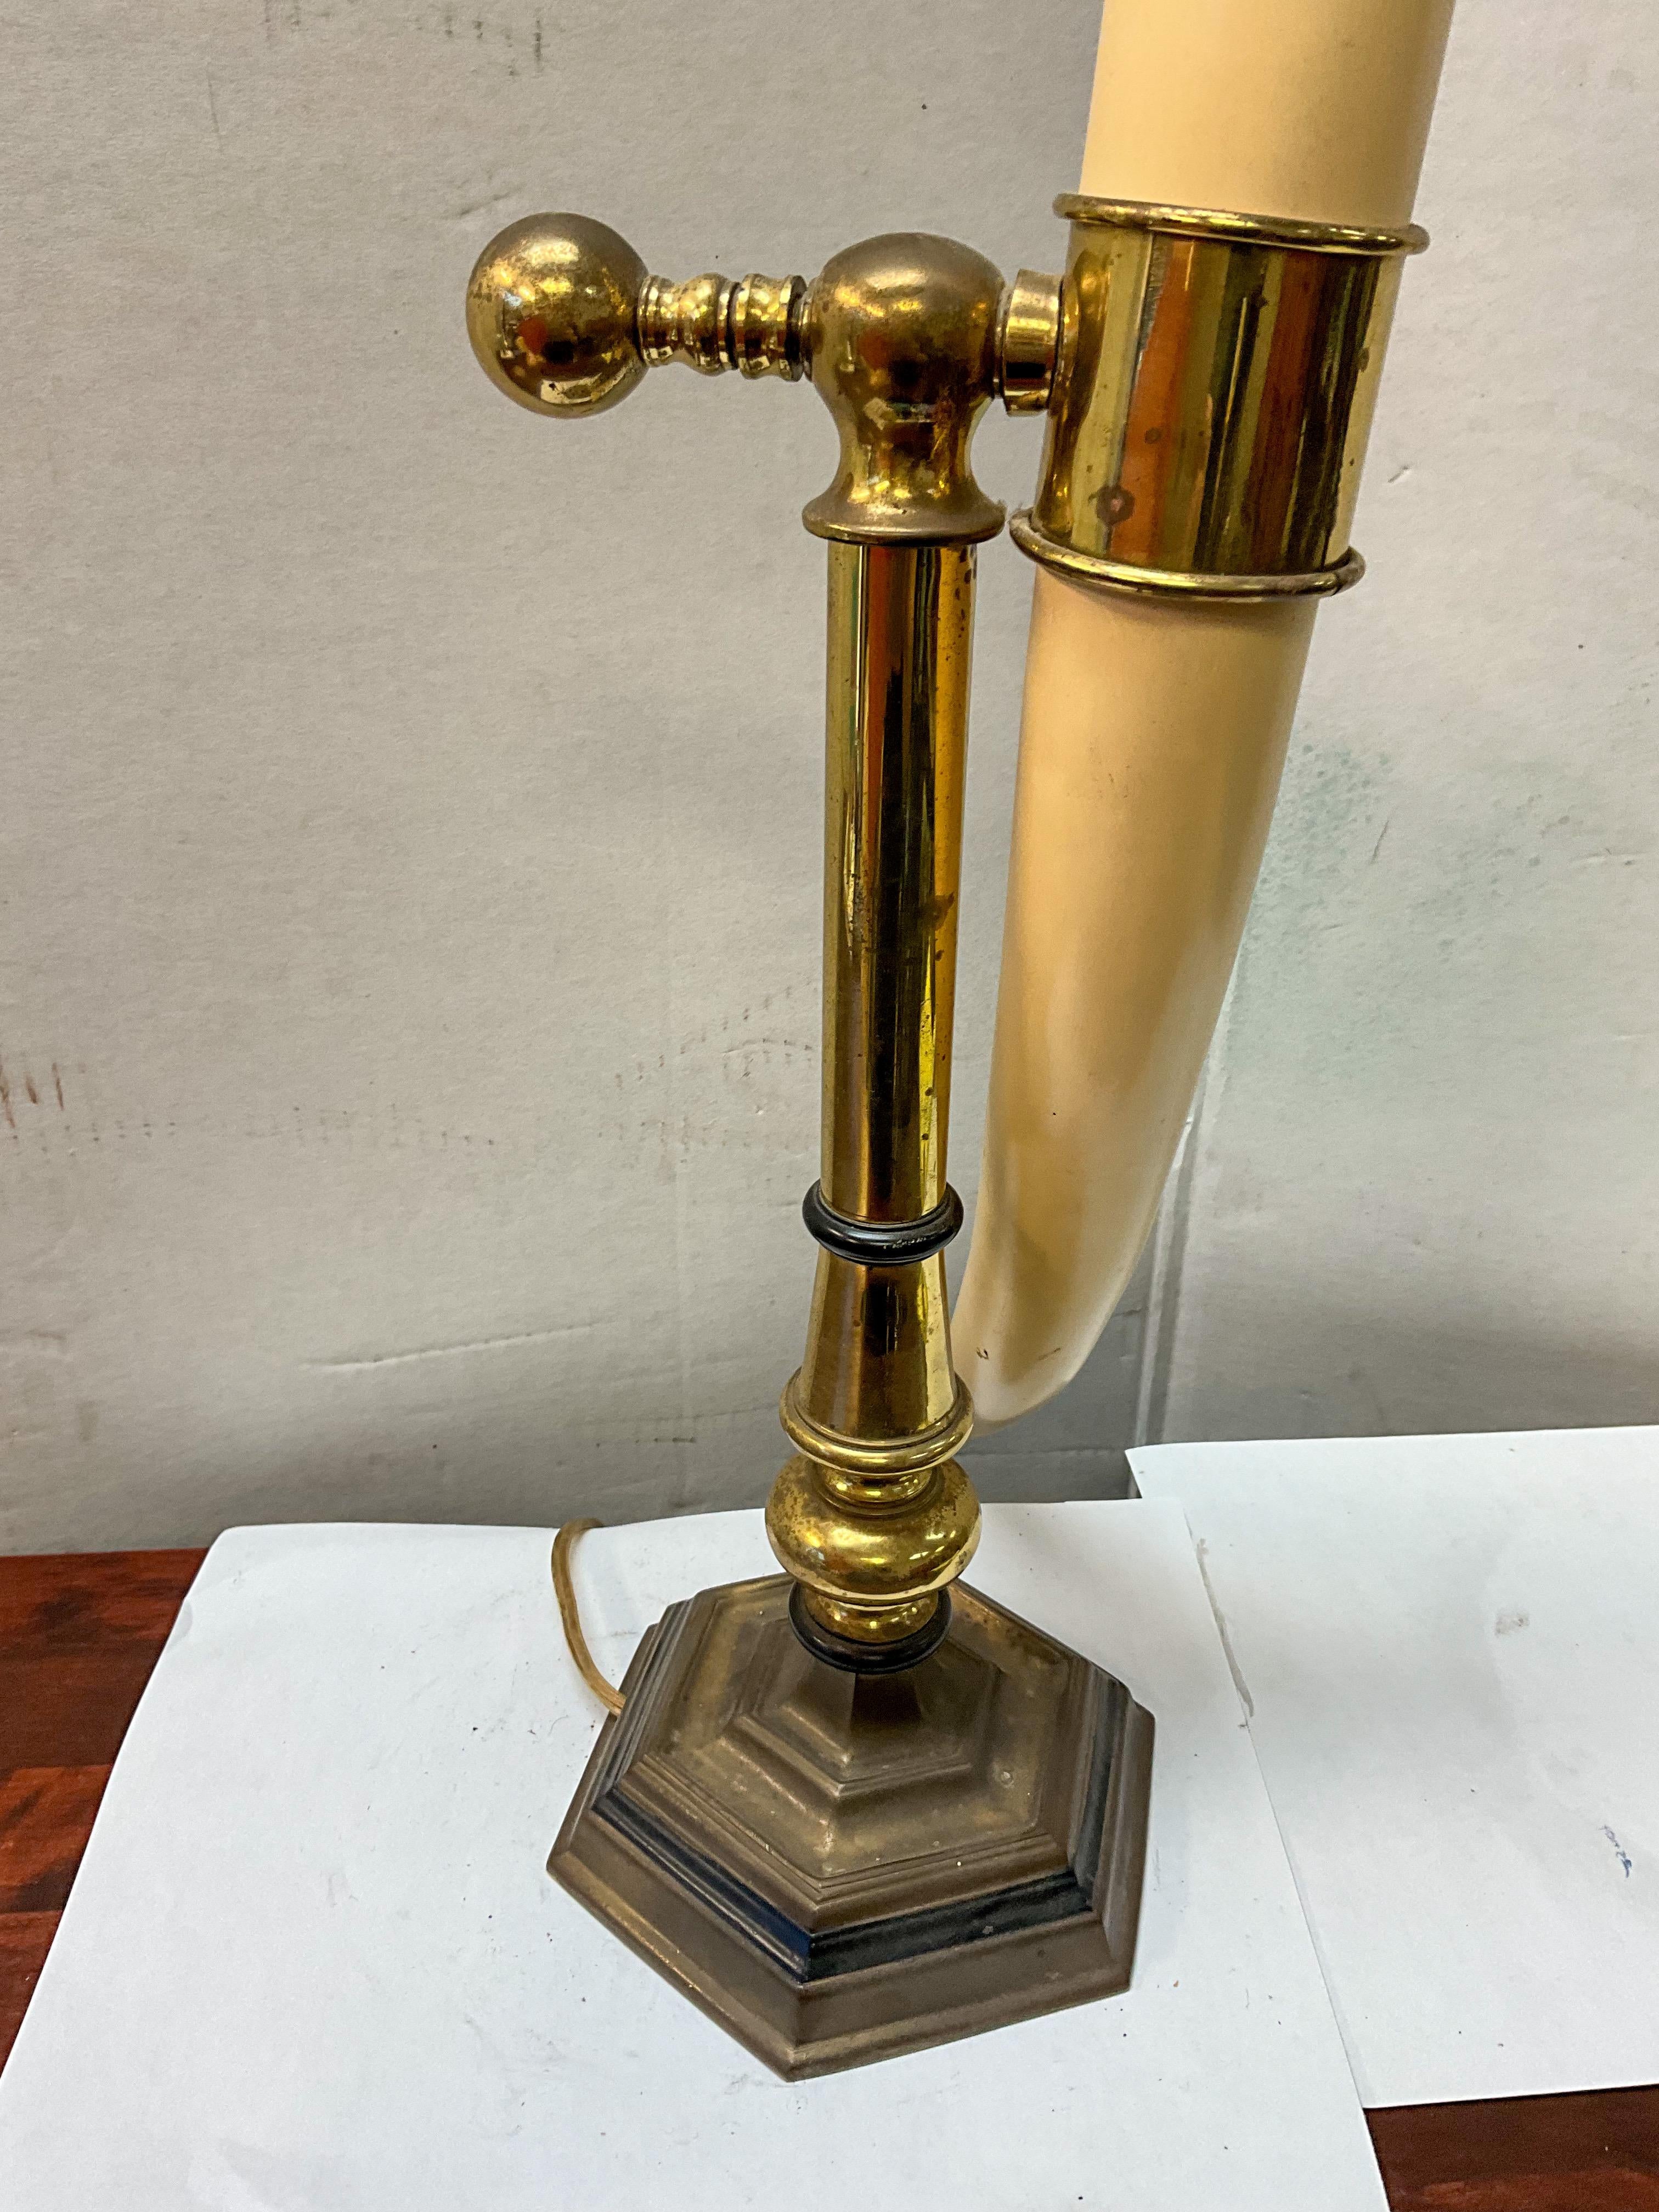 This is a neoclassical style desk or table lamp that is a faux horn mounted to a brass support. It is adjustable by the knob in the back. It is by Chapman. There is wear to the brass.